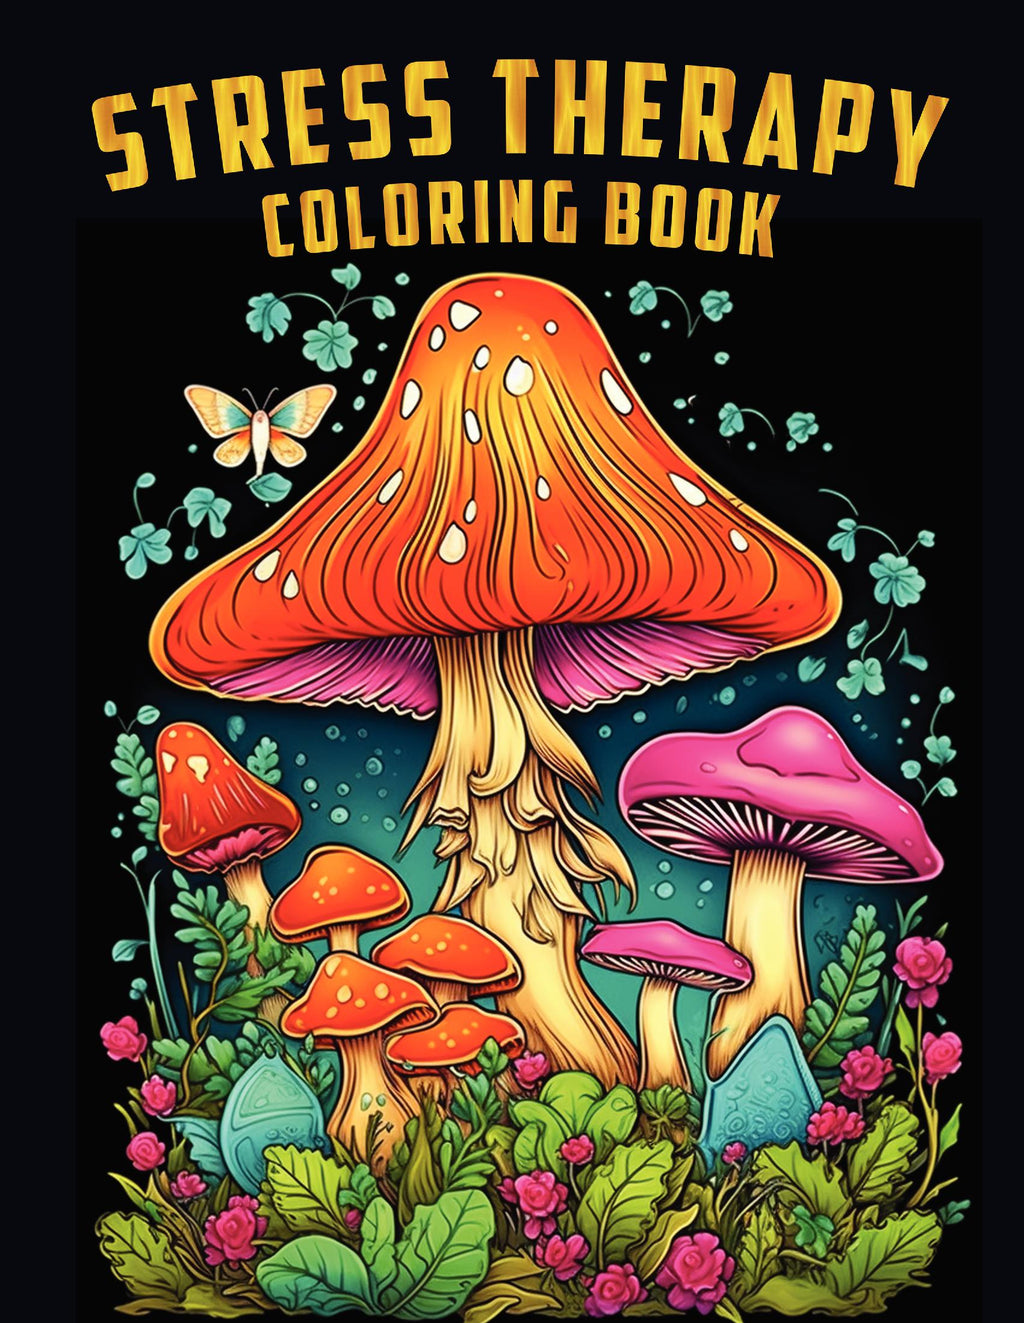 4 in 1 Adult coloring book - The Anxiety coloring book - a Zen